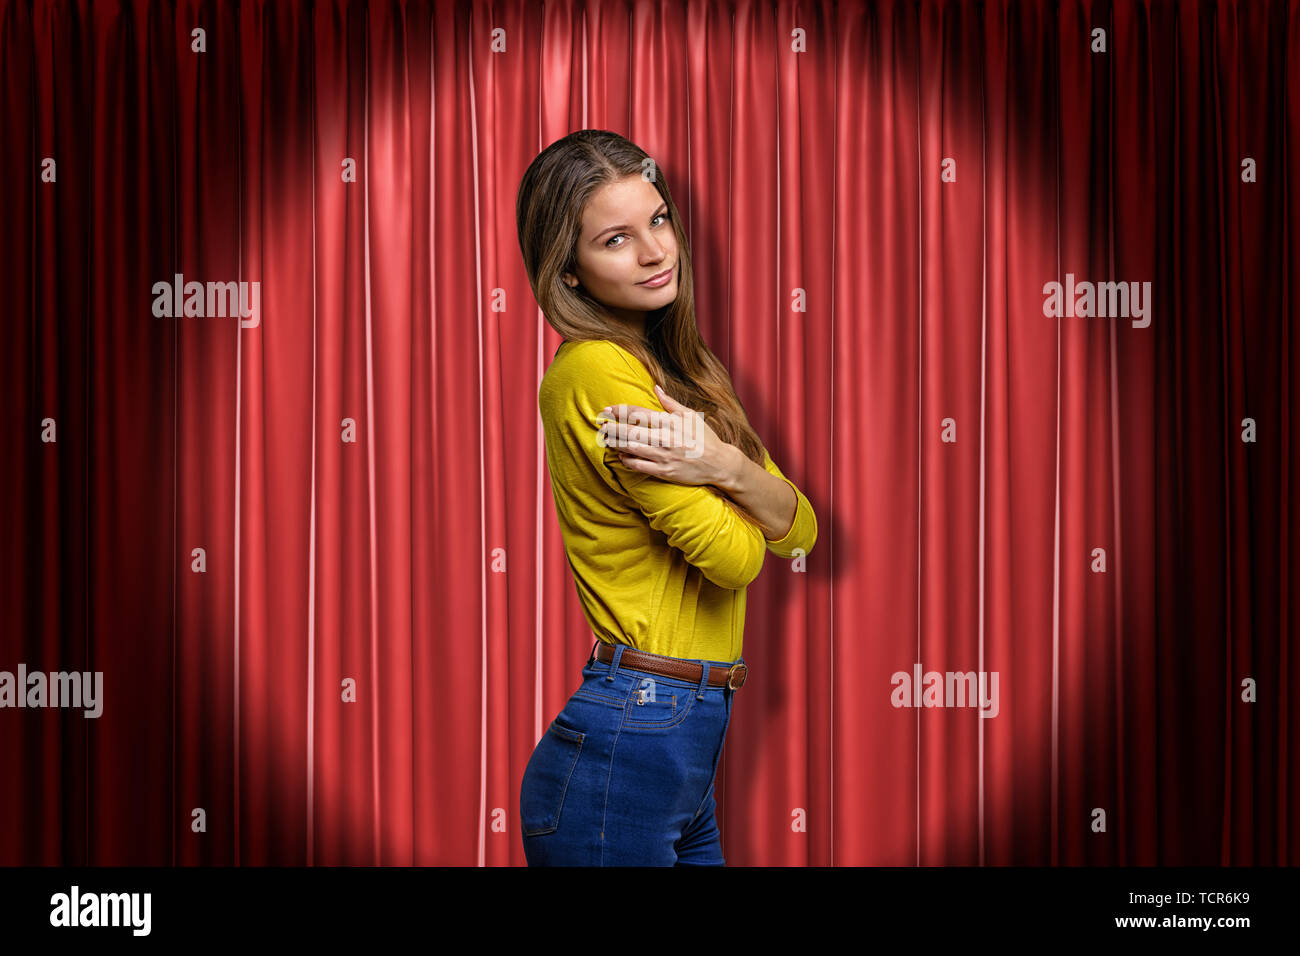 Young woman wearing blue jeans and yellow shirt embracing herself on red stage curtains background Stock Photo